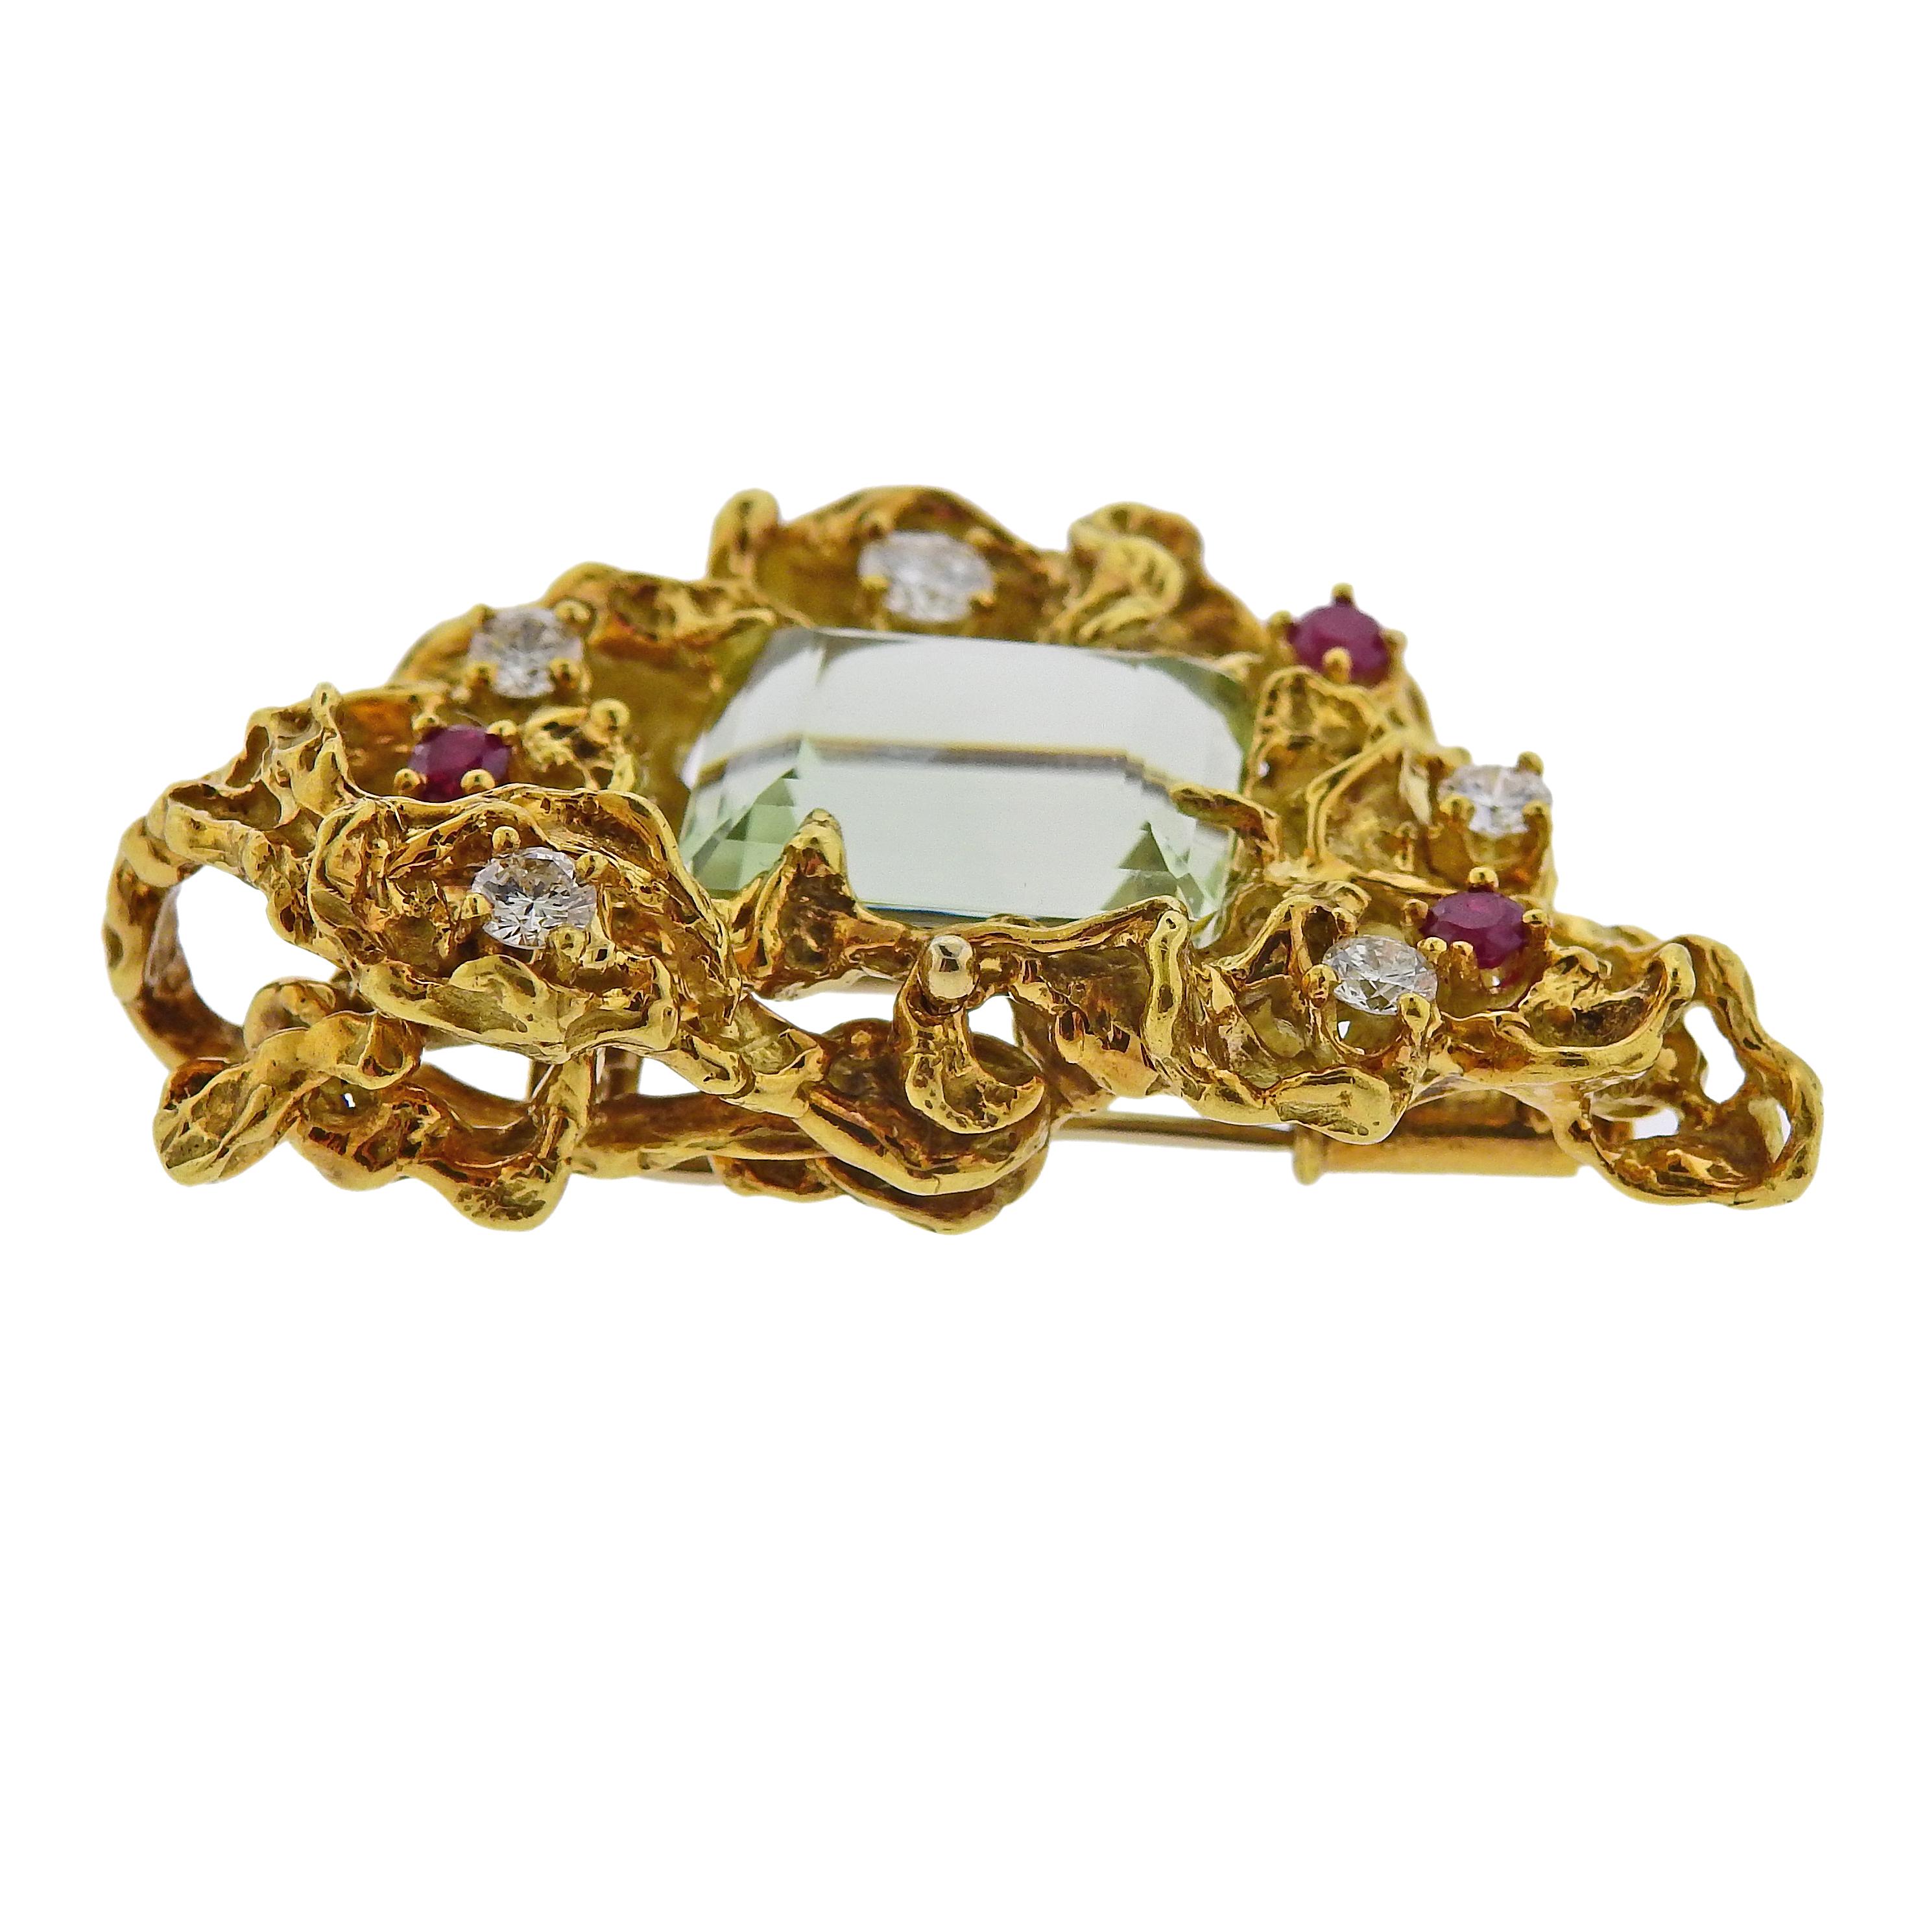 Vintage circa 1970s 18k gold  free form convertible brooch pendant by Arthur King, featuring approx. 0.15ct aquamarine, rubies and approx. 0.85ctw in diamonds. Brooch is 52mm x 33mm, weighs 34.8 grams. Marked: 18k, A. King mark. 